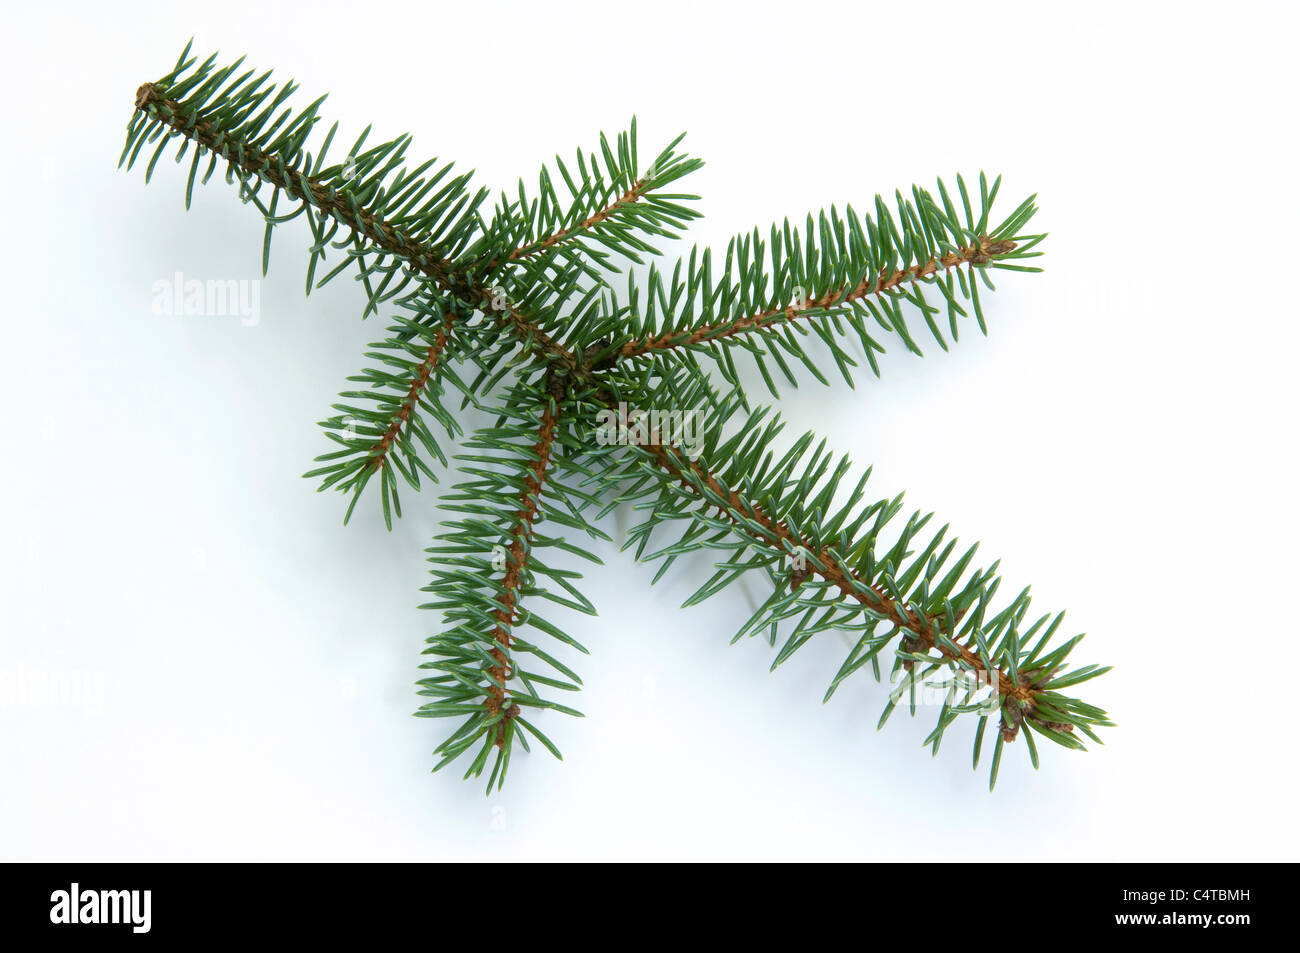 Blue Spruce (Picea pungens), twig. Studio picture against a white background. Stock Photo